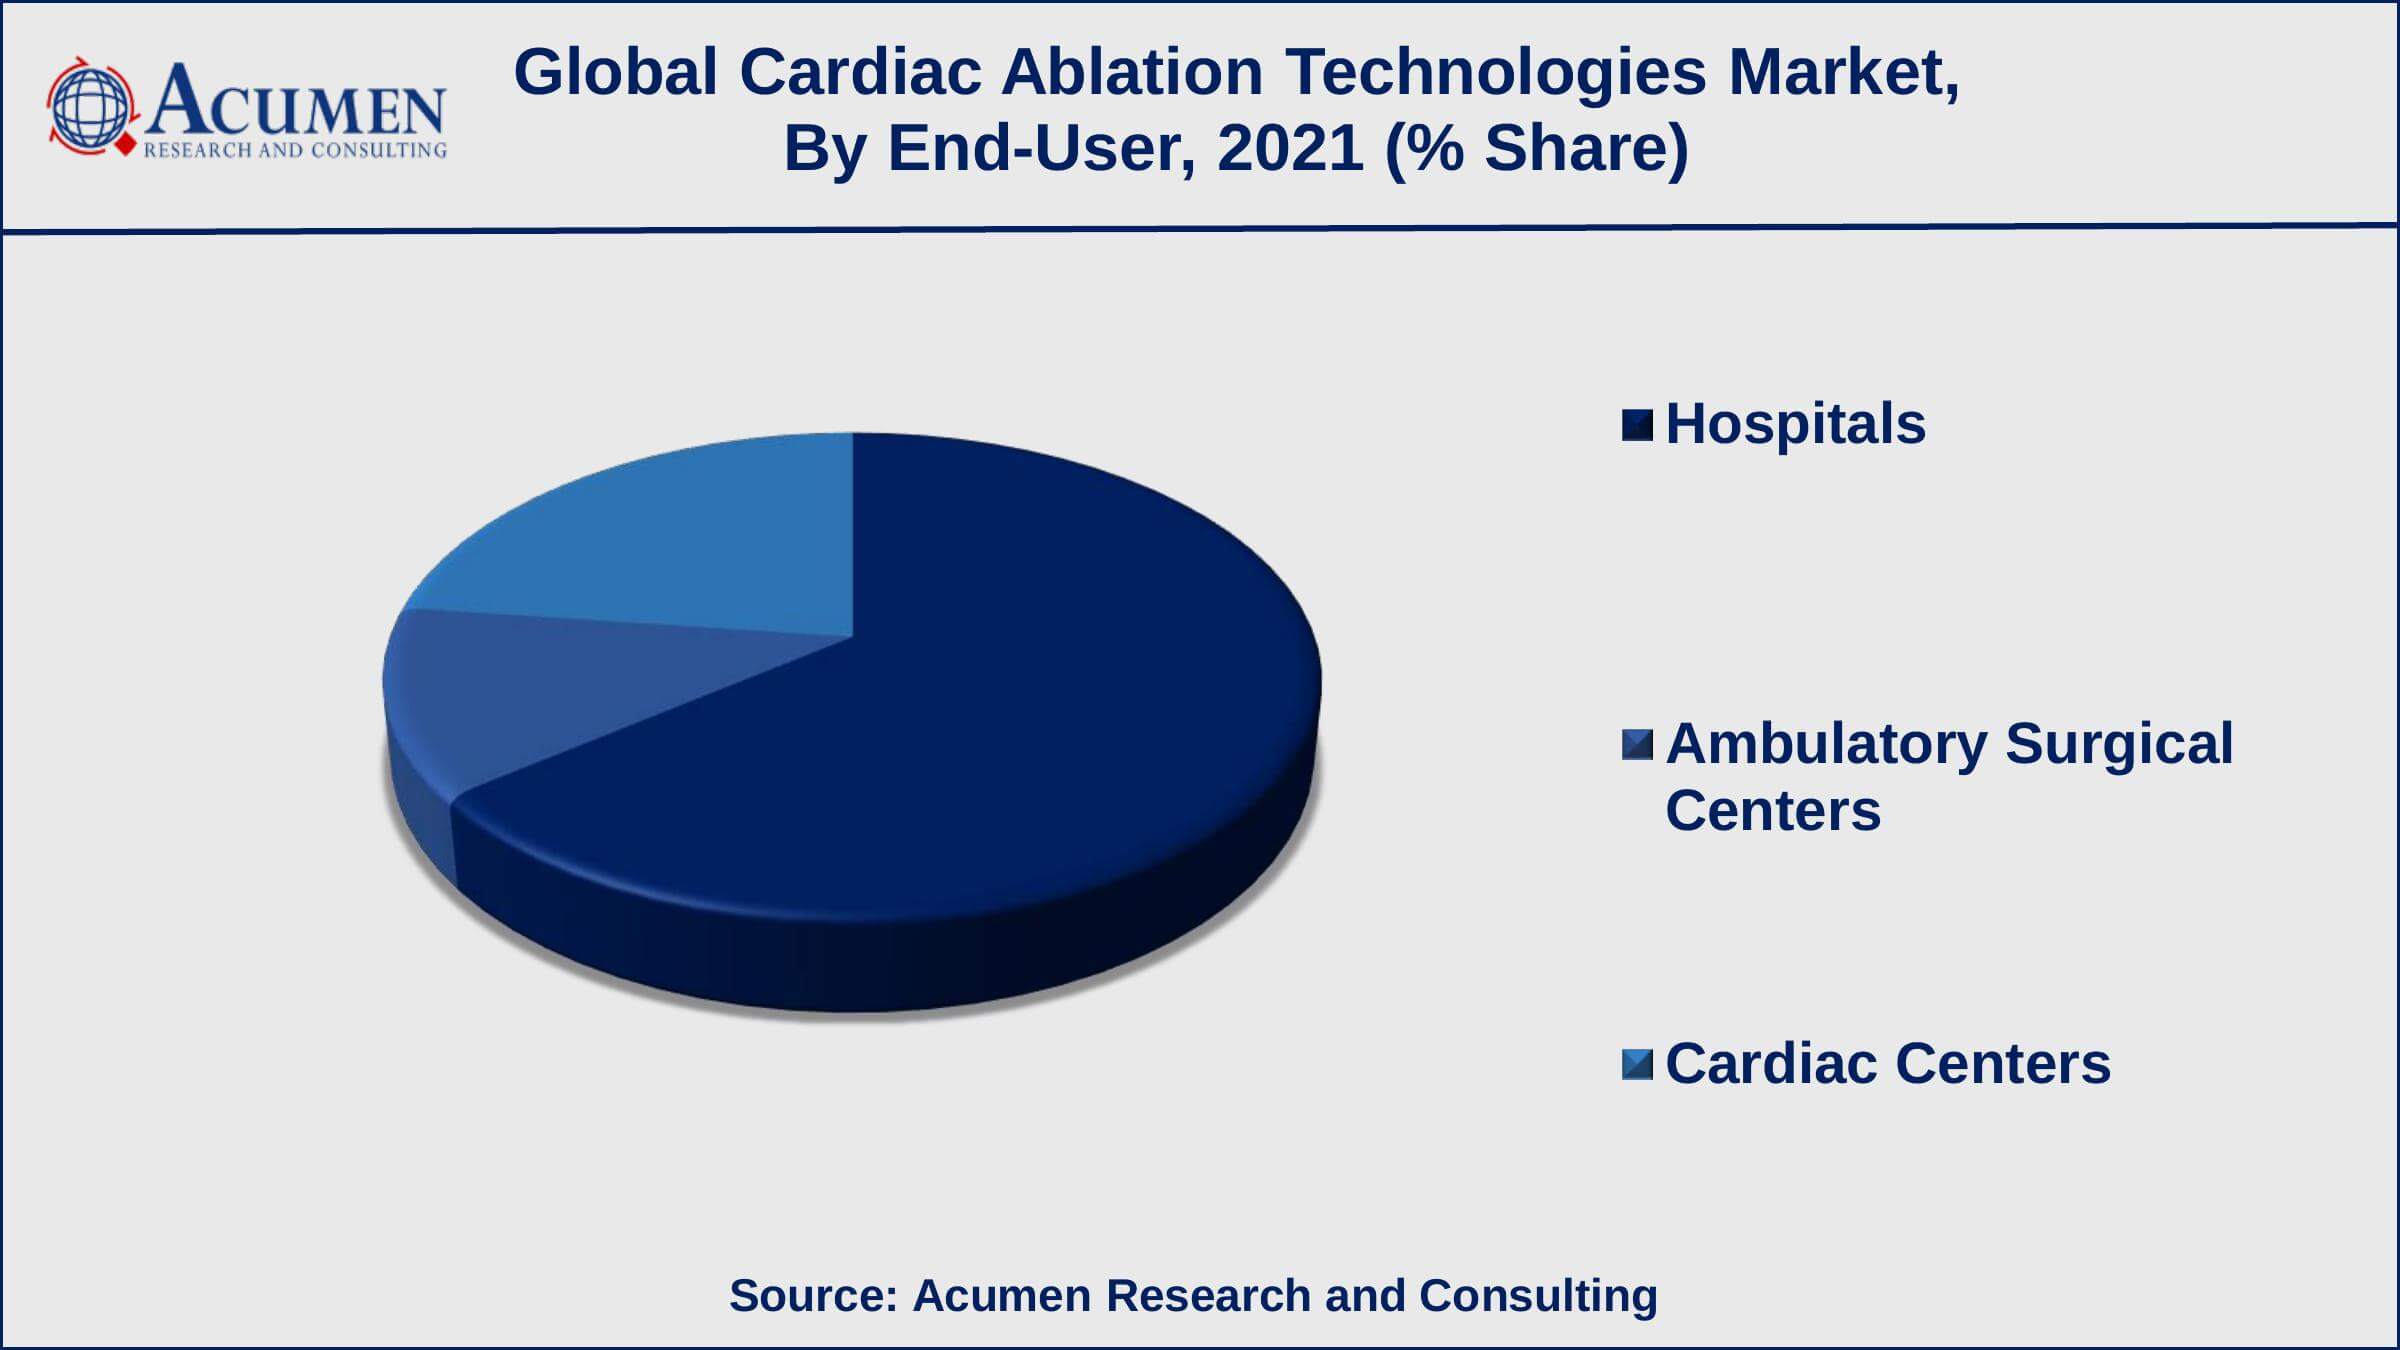 Among end-use, hospitals generated shares of over 65% in 2021